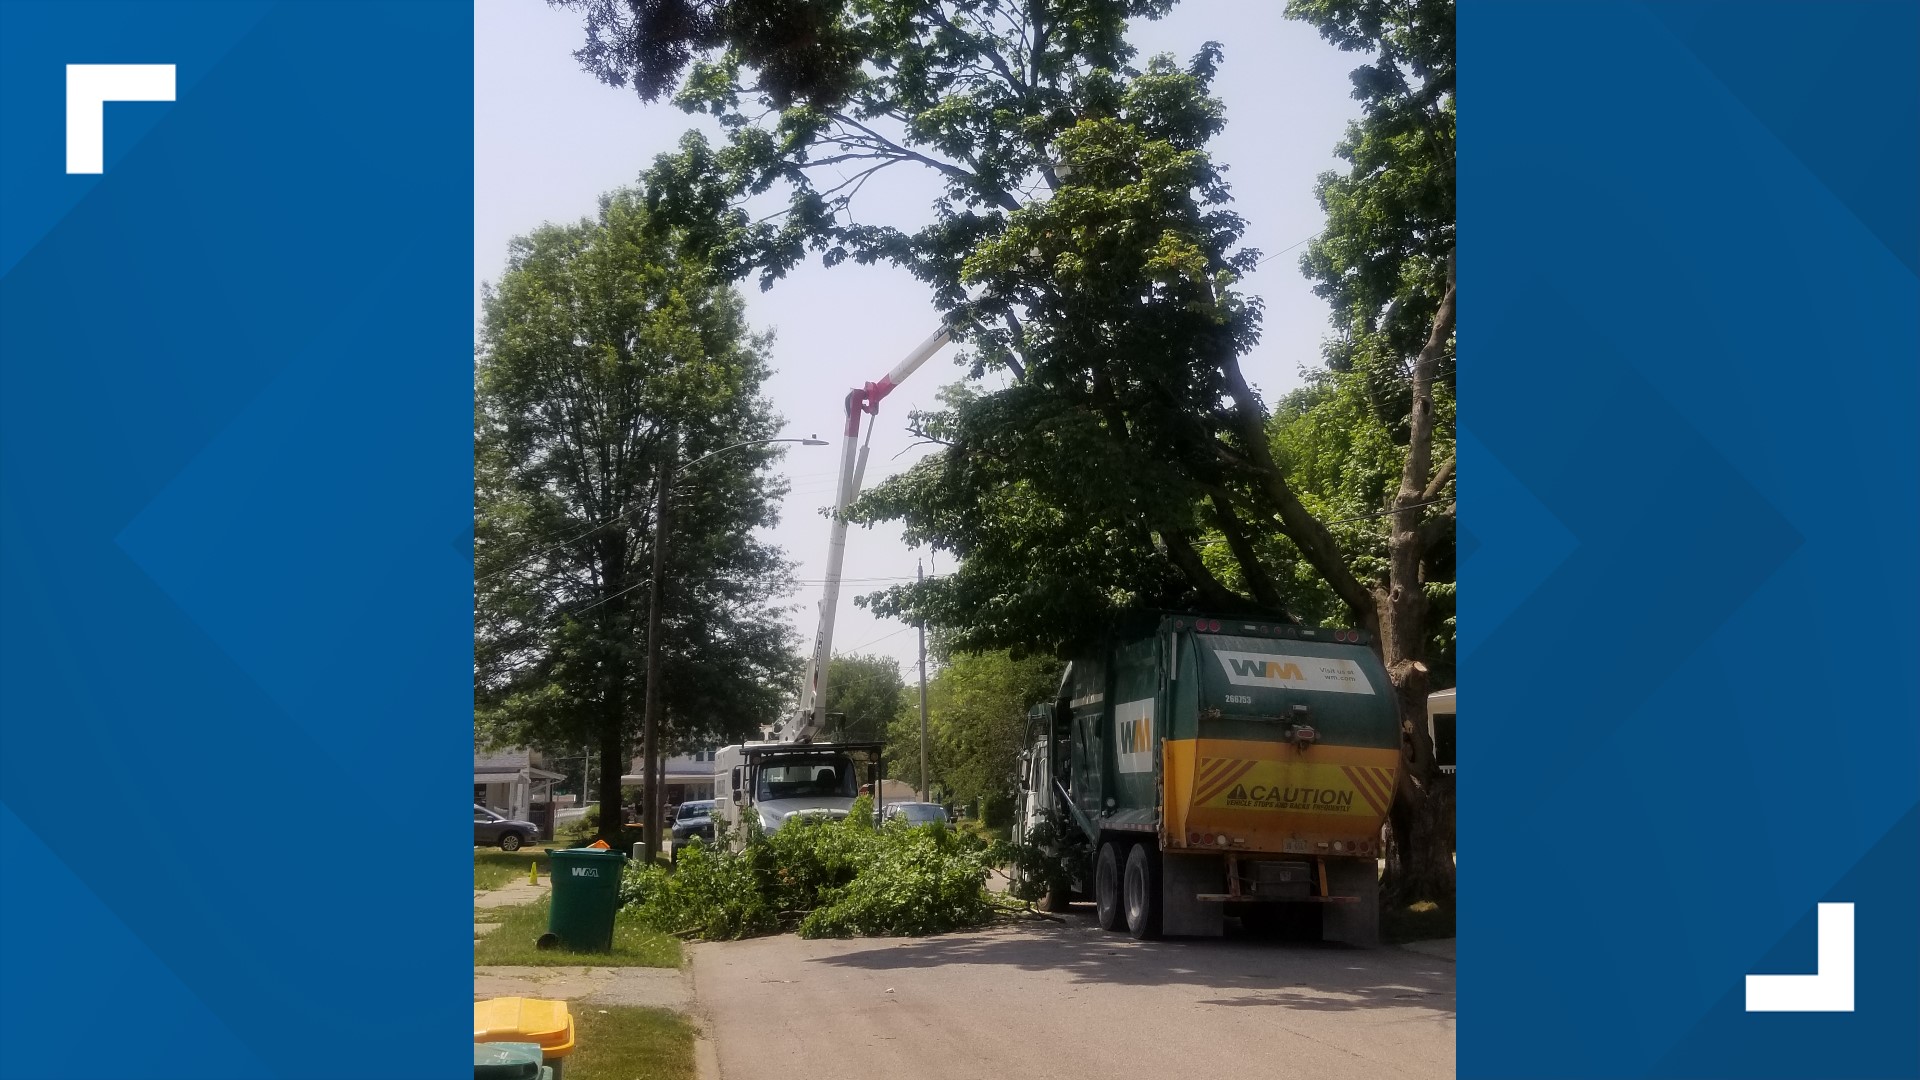 Neighbors said the driver's routine route was thwarted when a taller-than-normal truck got snagged in a tree's branches. It took crews nearly 4 hours to cut it out.